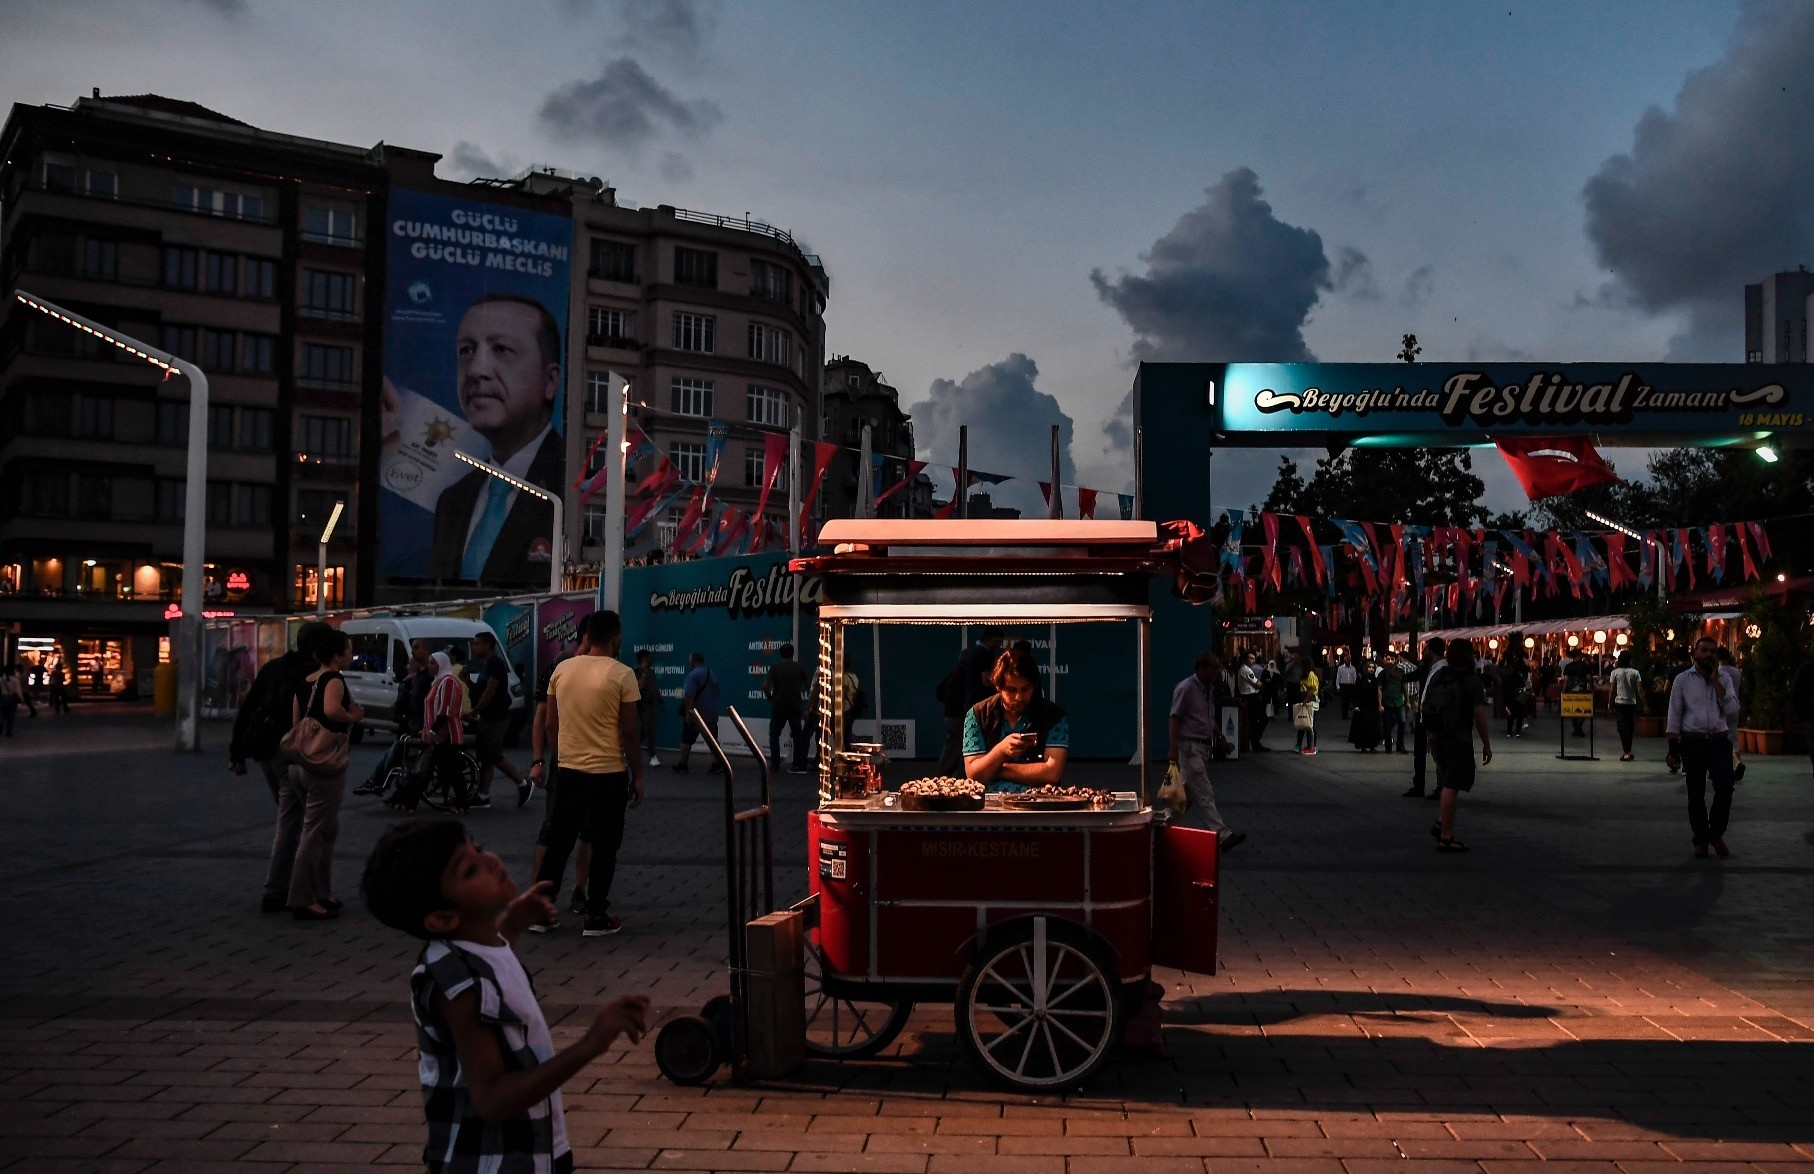 A man sells chestnuts in Taksim square under a campaign poster of President Erdou011fan, Istanbul, July 18.